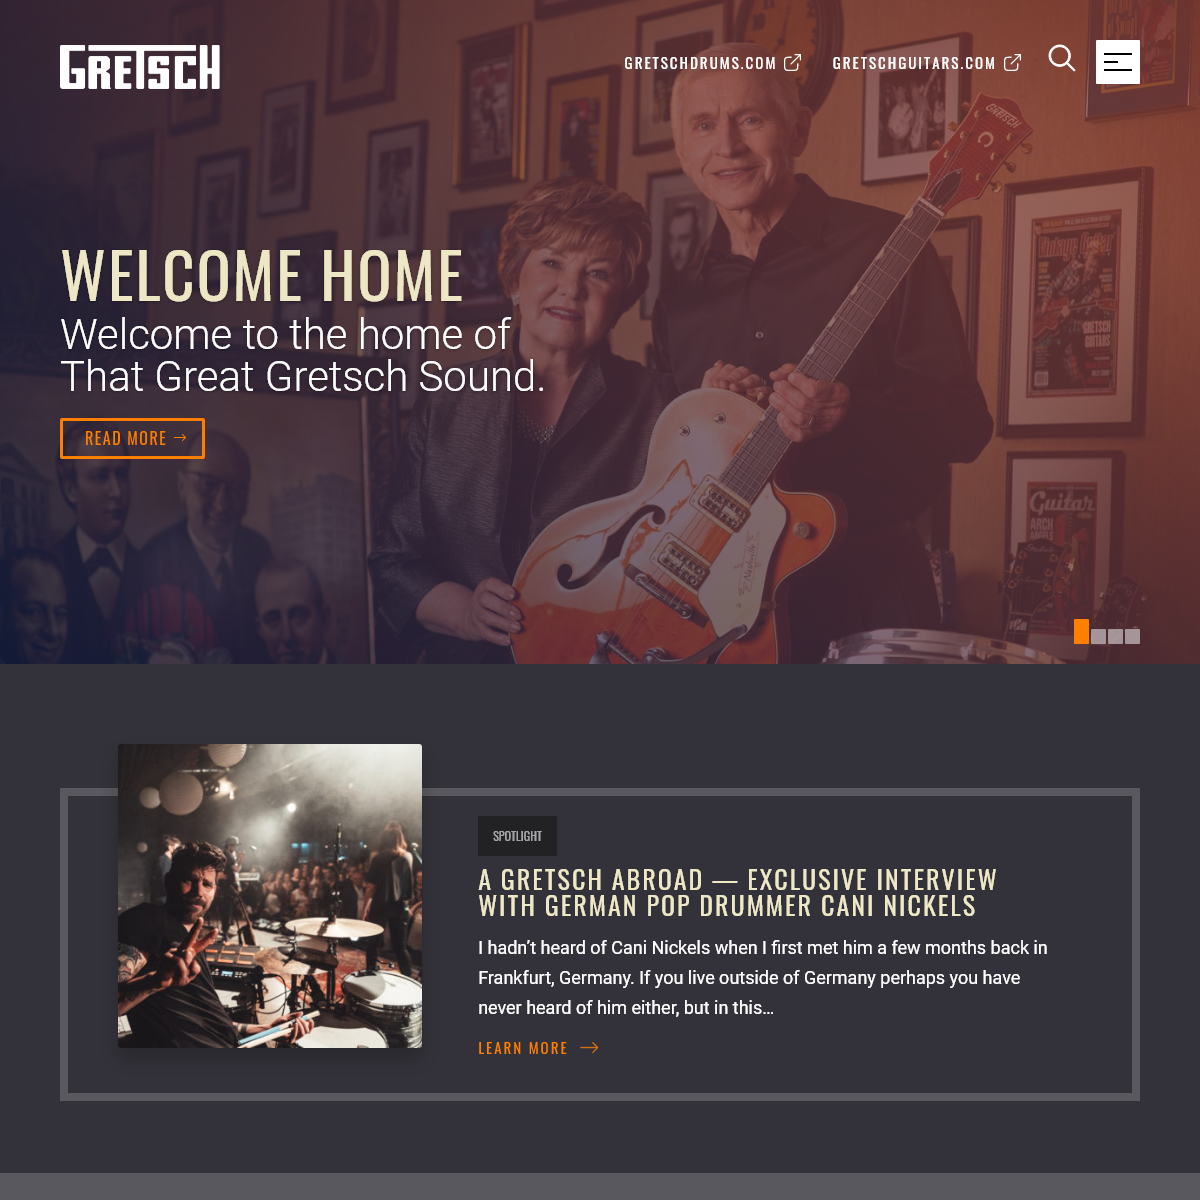 A complete backup of gretsch.com